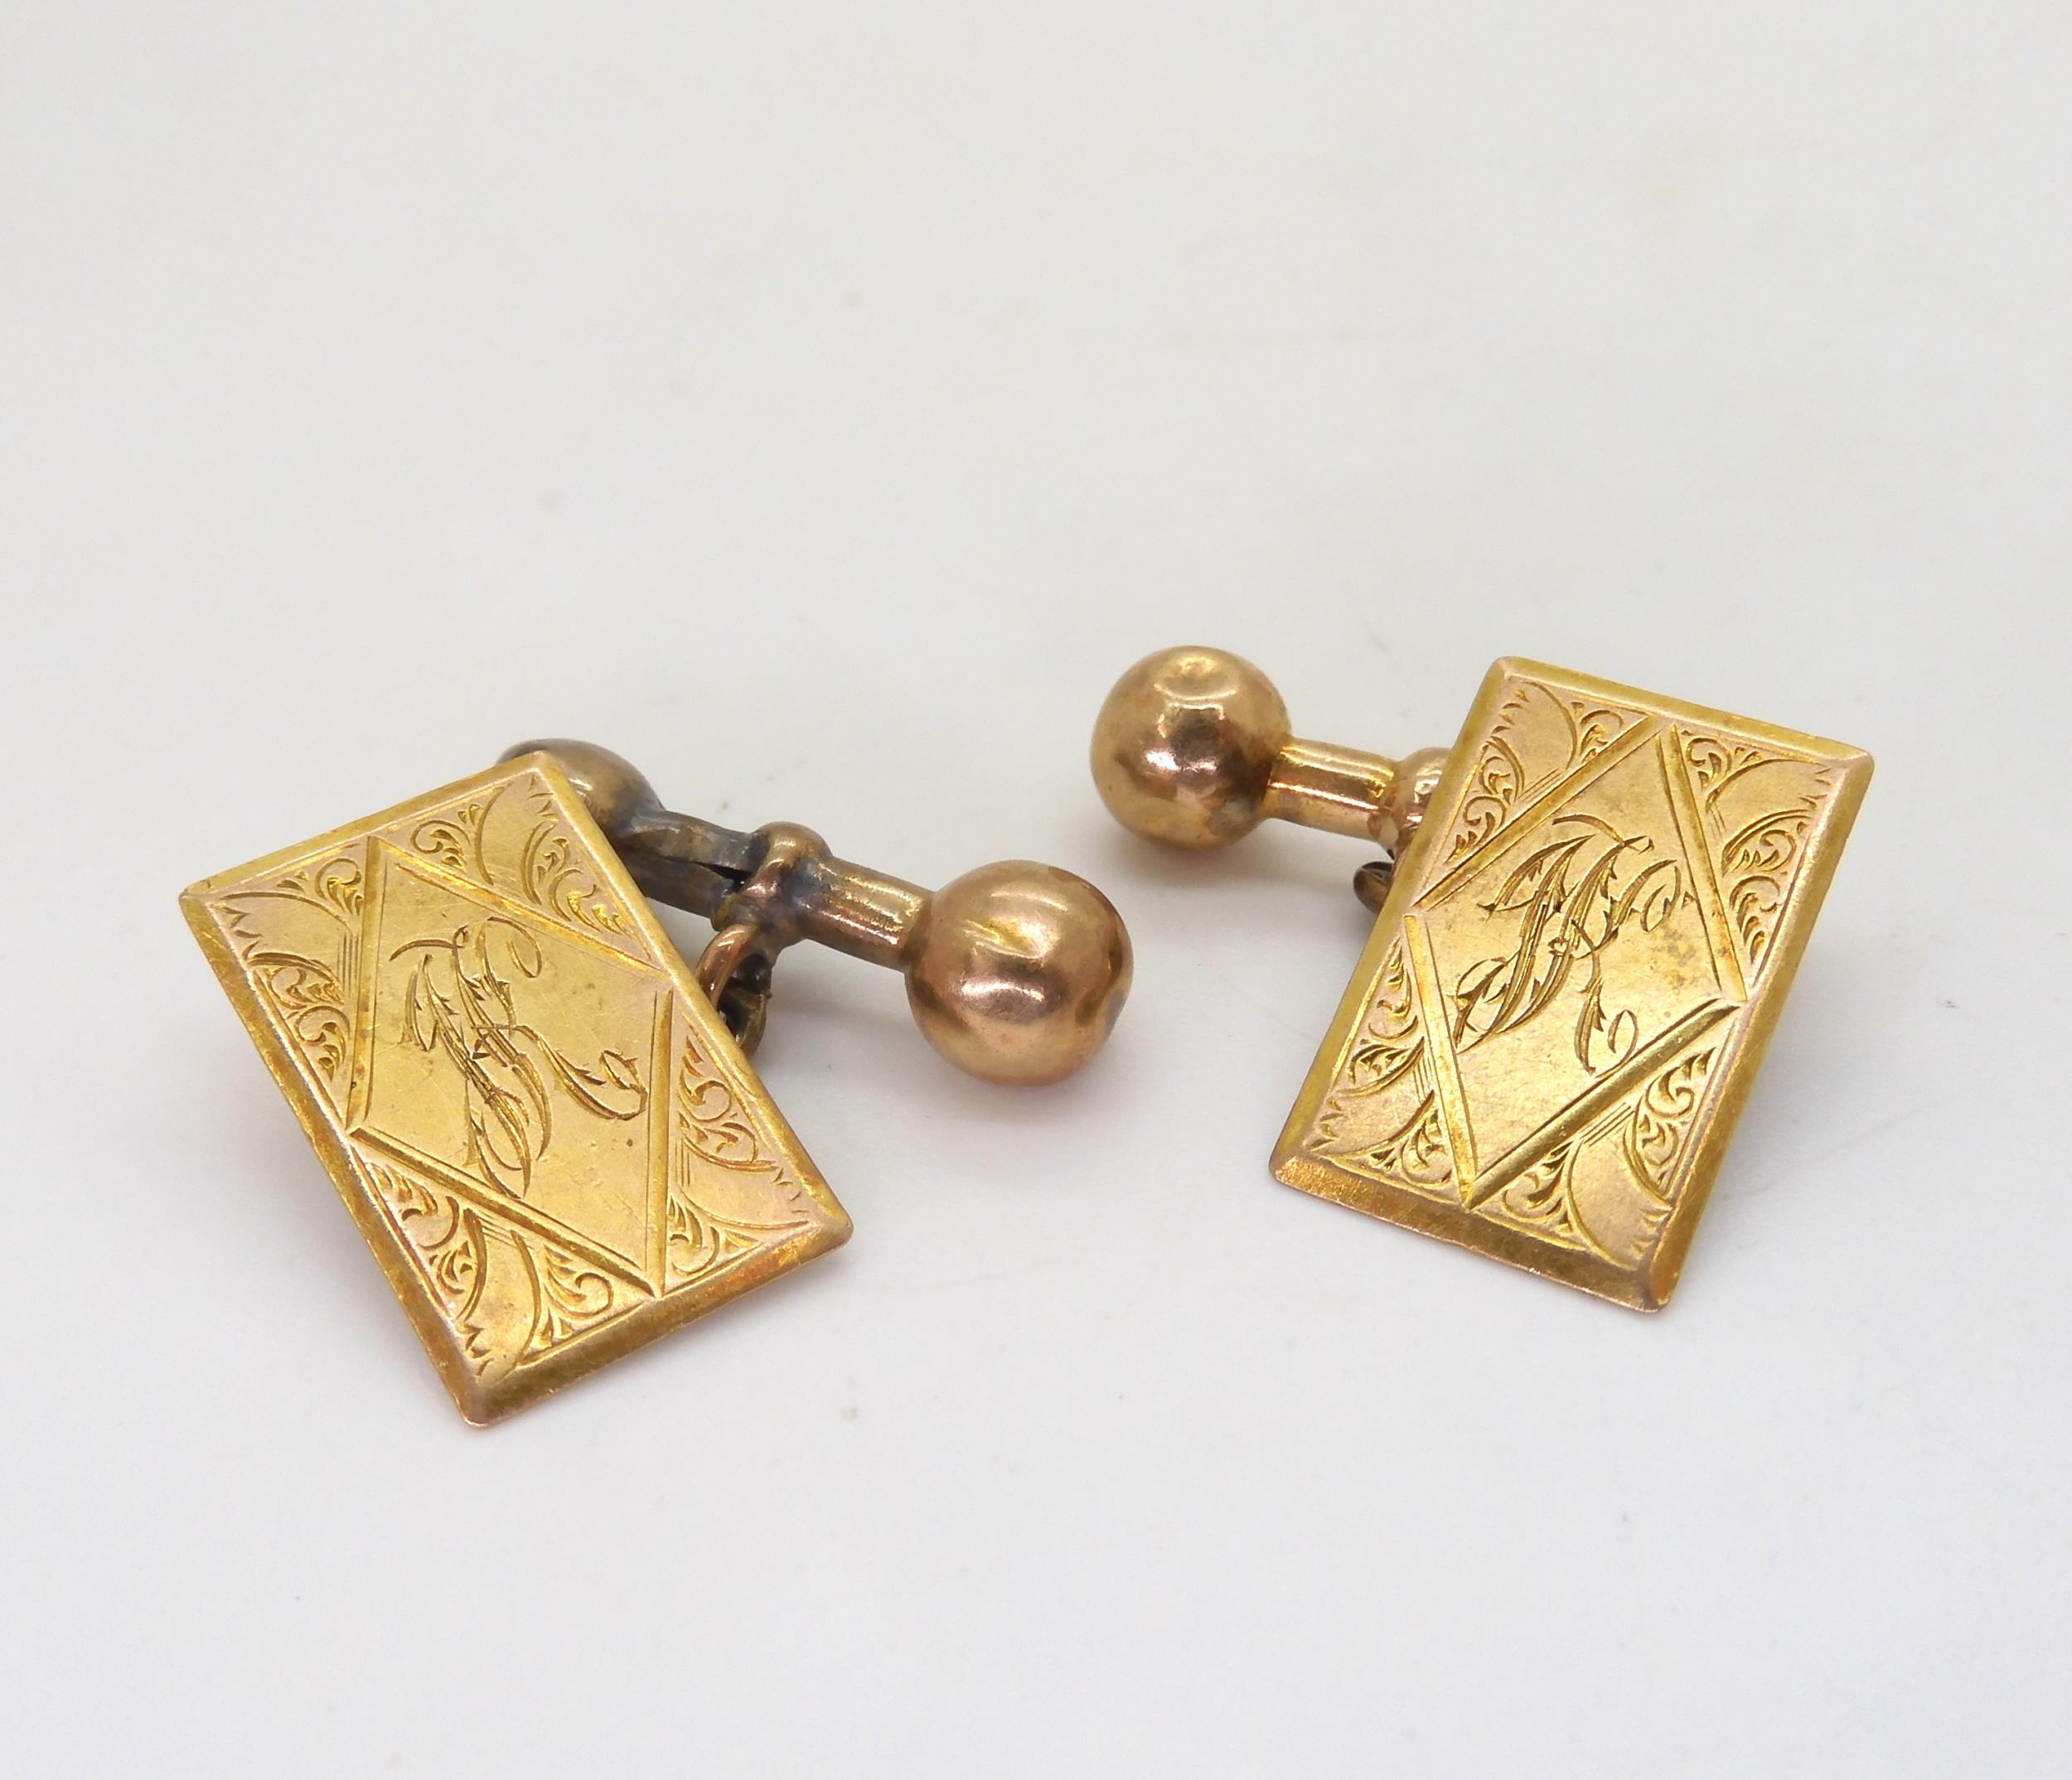 A pair of 9ct gold engraved cufflinks, with monogram and inscribed with the date verso 4/9/1930.